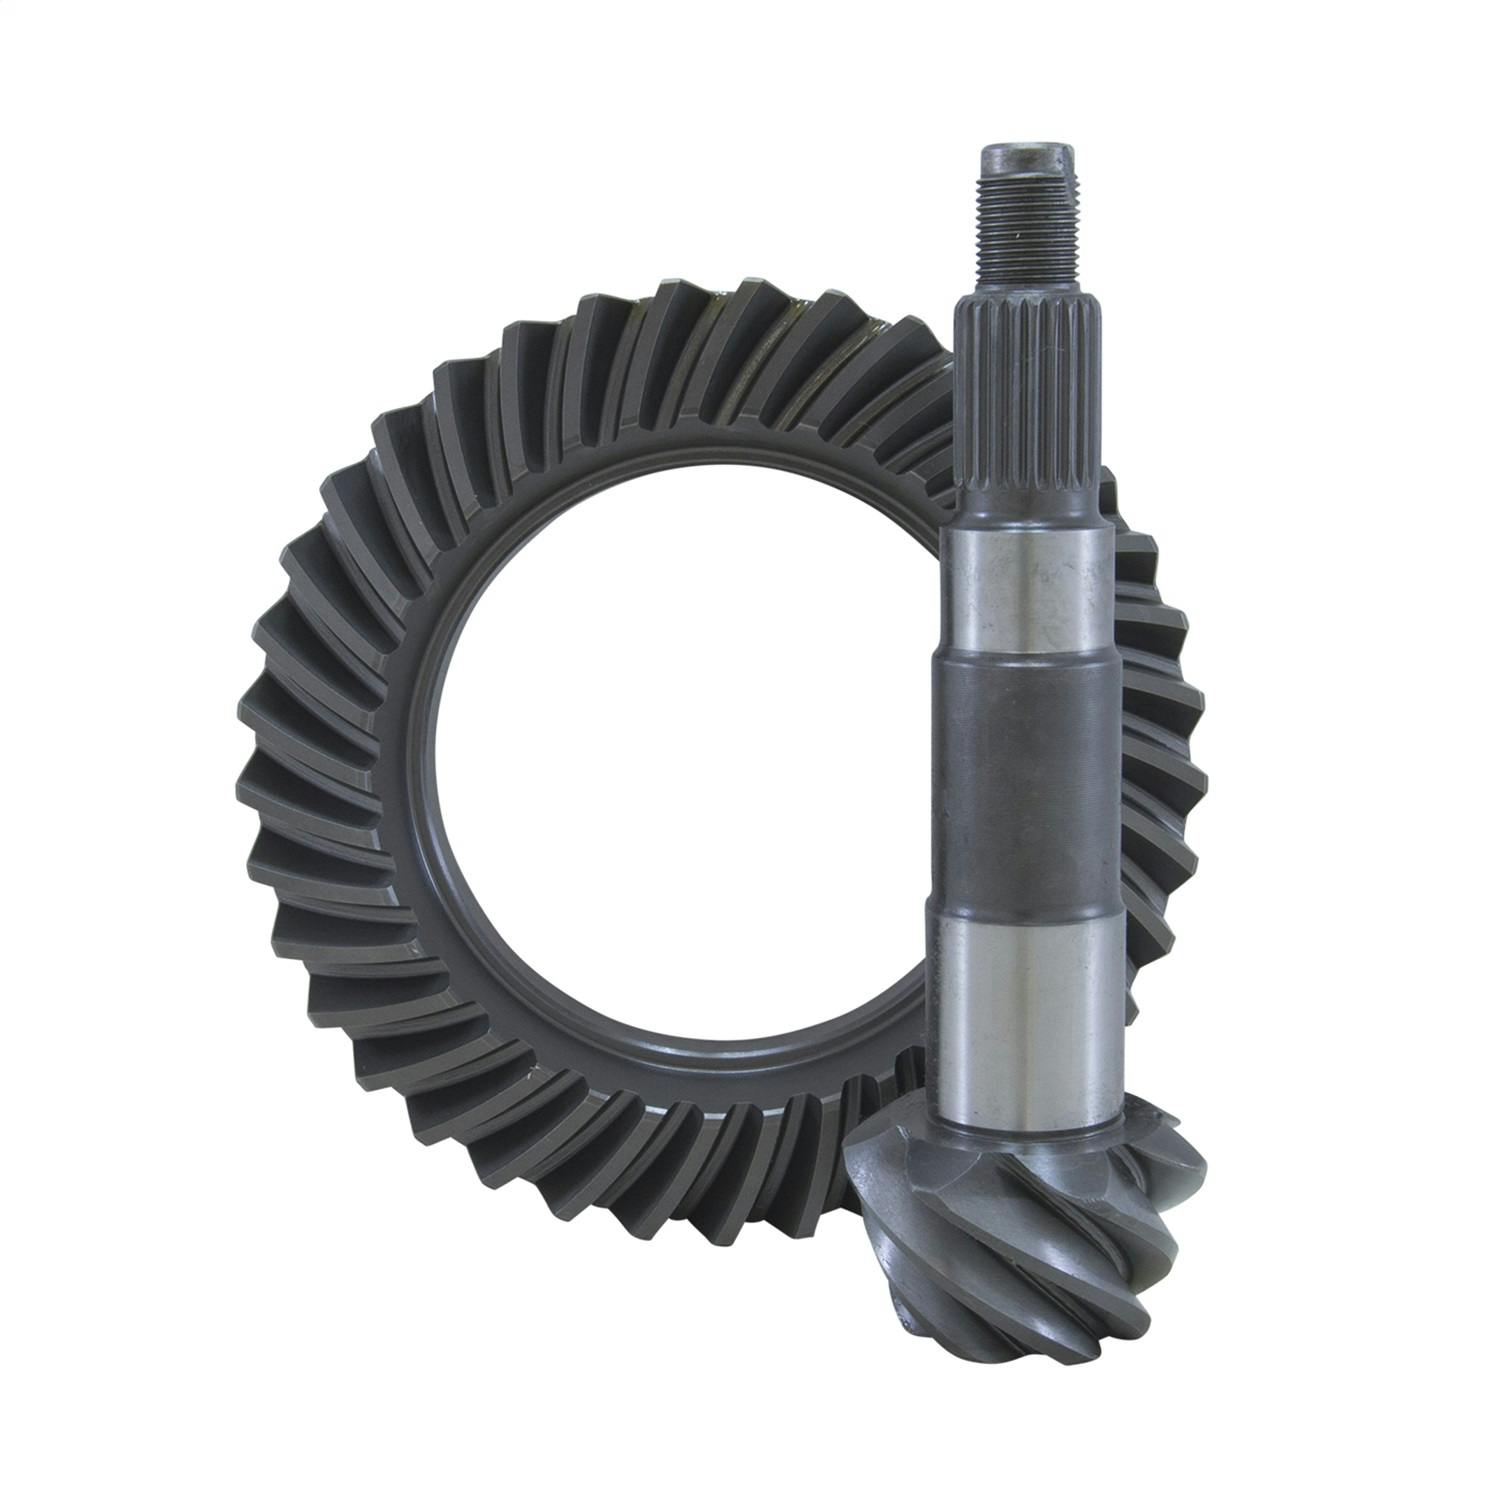 USA Standard Gear ZG T7.5-456 Differential Ring and Pinion